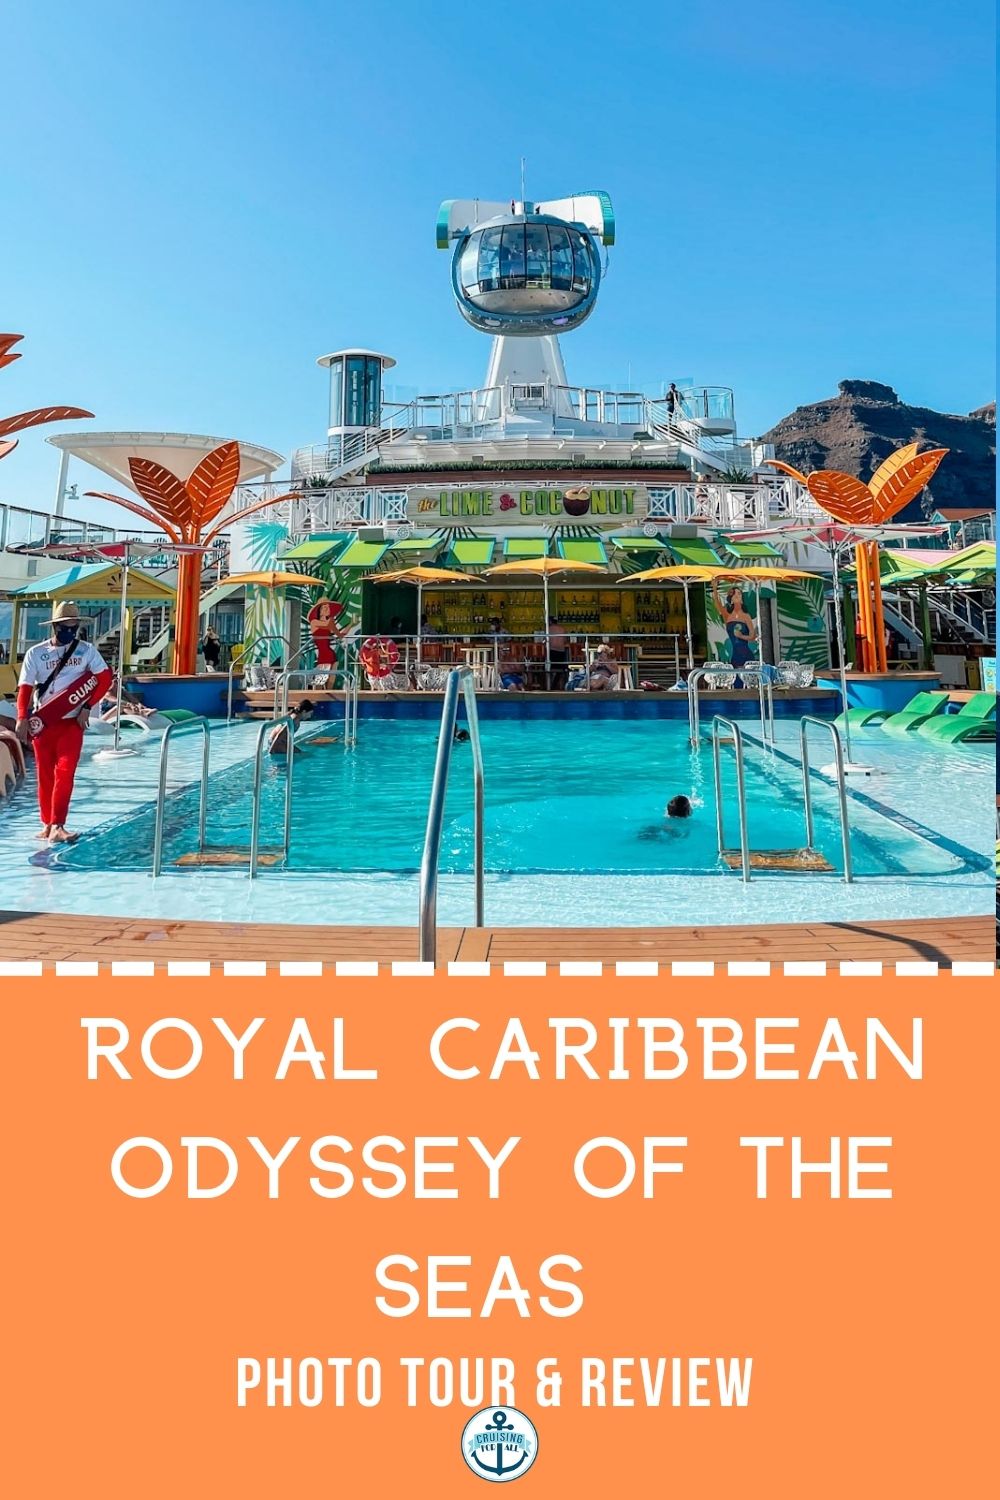 Royal Caribbean Photo Tour and Review